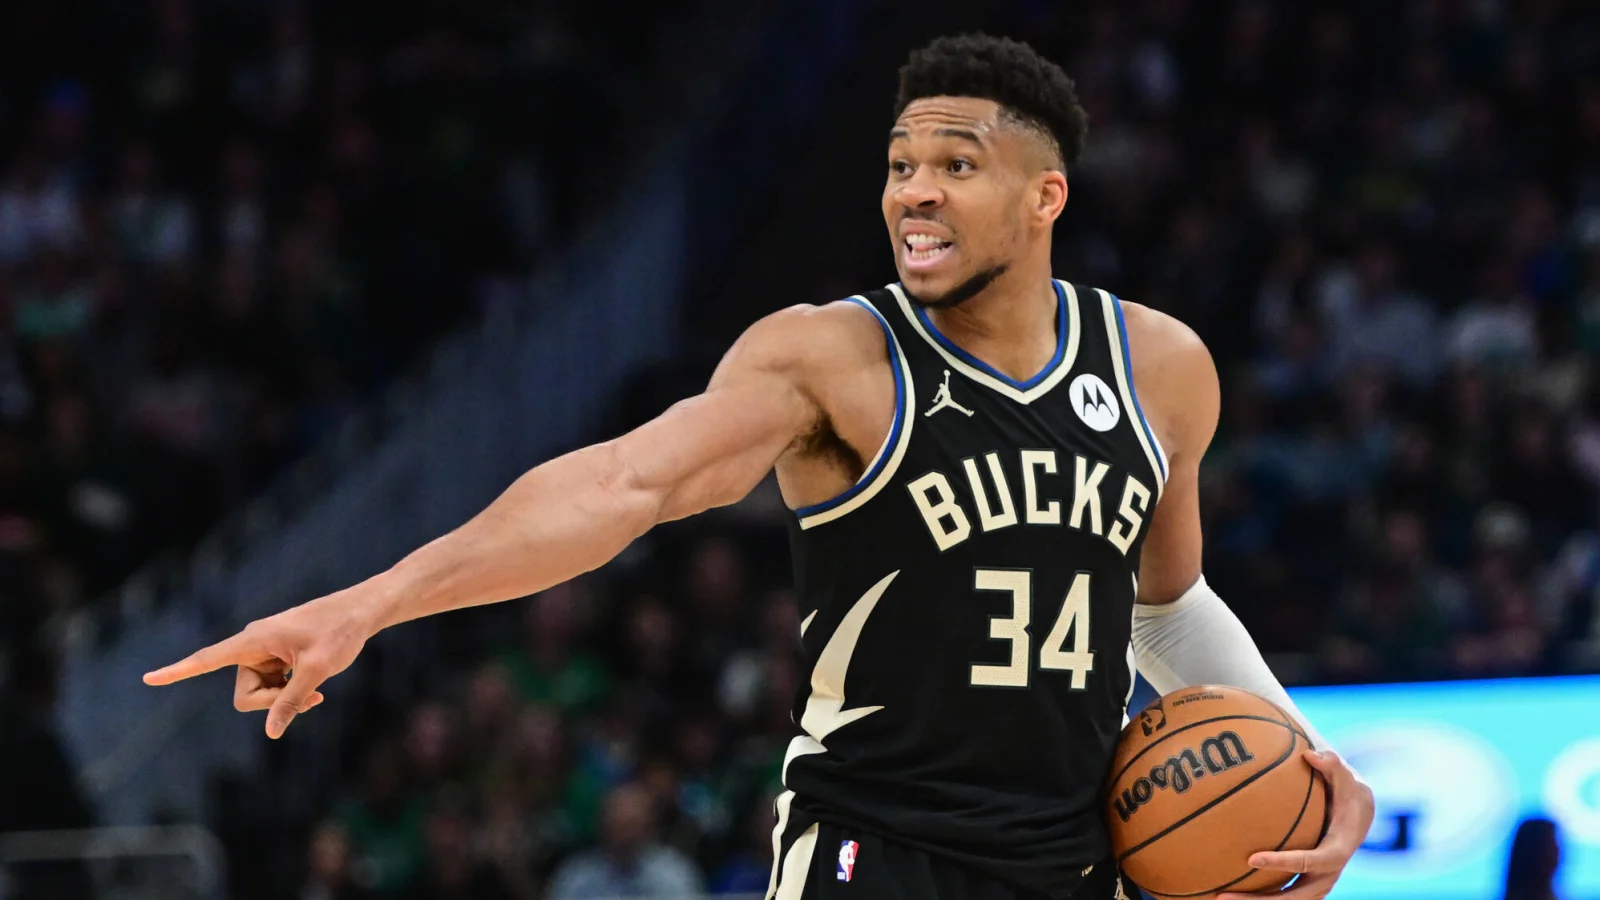 Giannis Antetokounmpo at the Center of NBA Speculation as Free Agency Looms